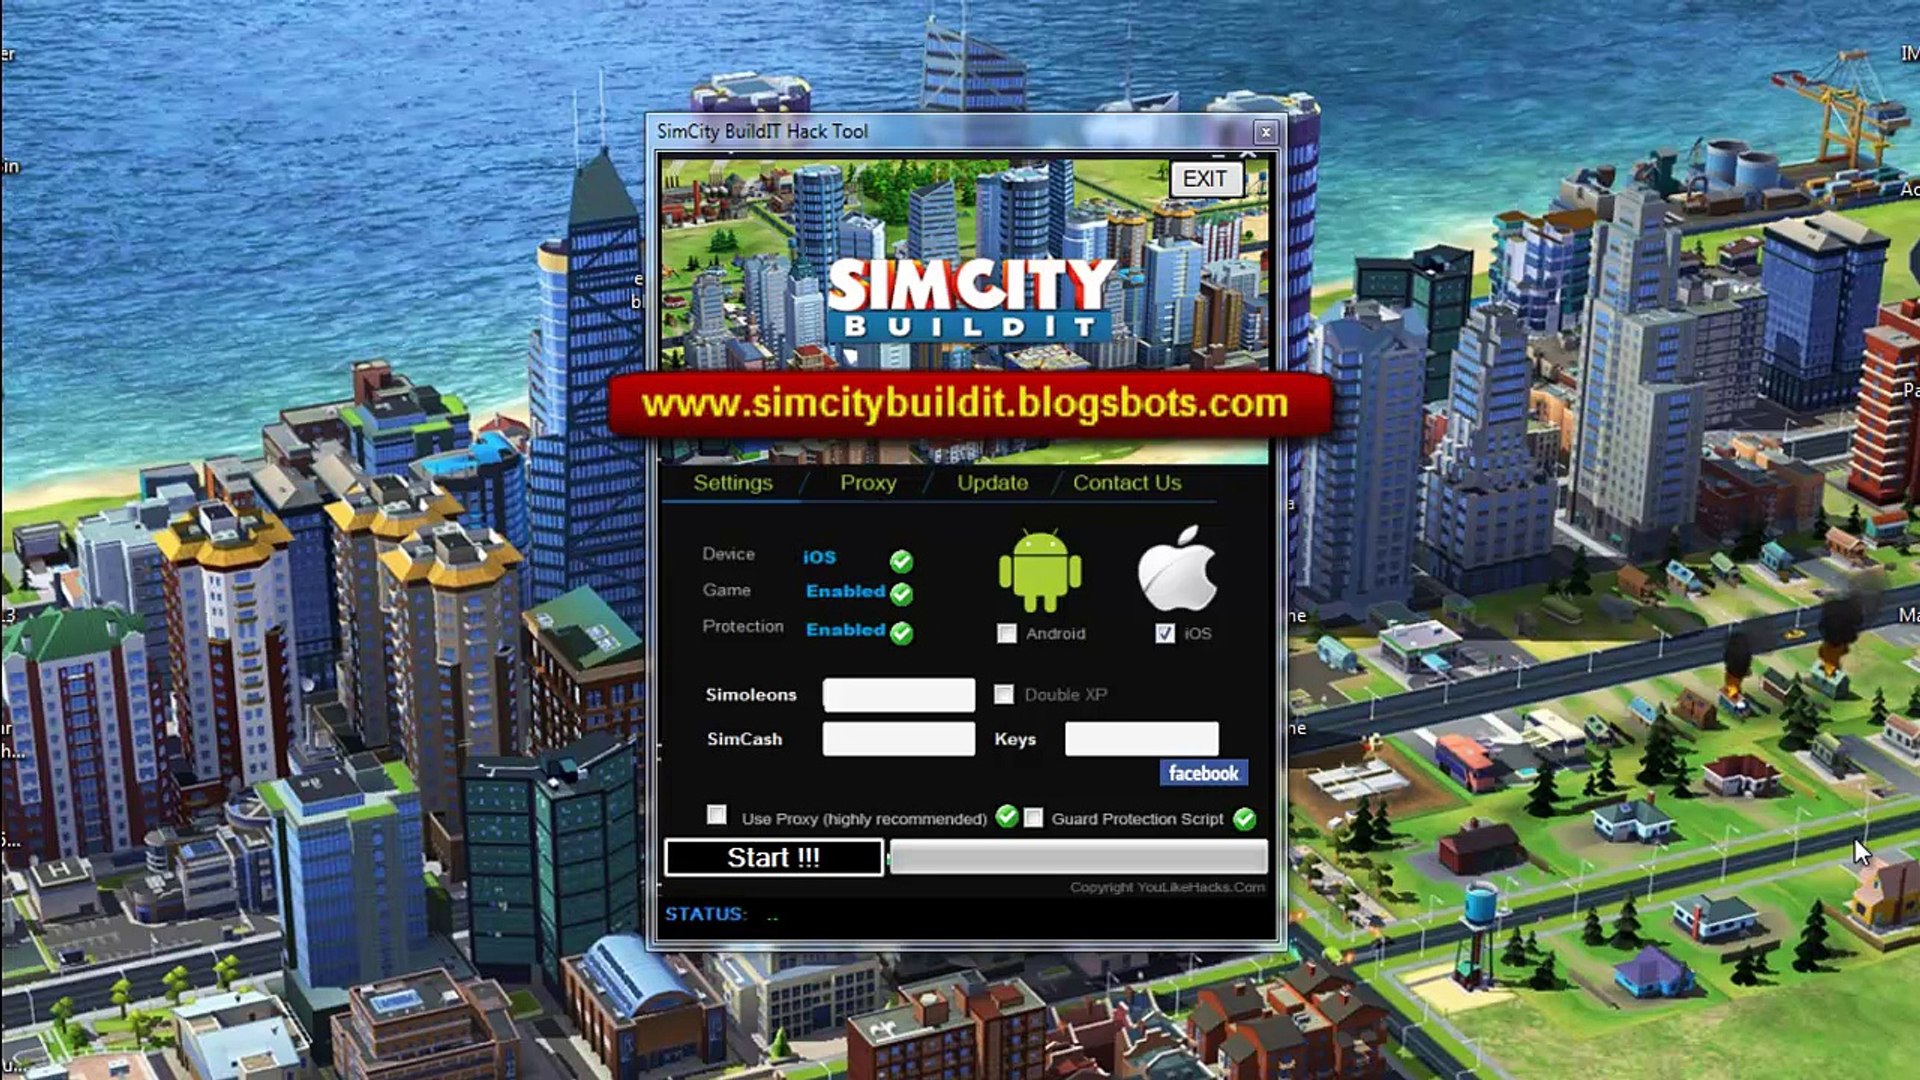 Simcity Buildit Hack Tool Unlimited Simcash Unlimited Simoleons Money Easy Guide Video Dailymotion